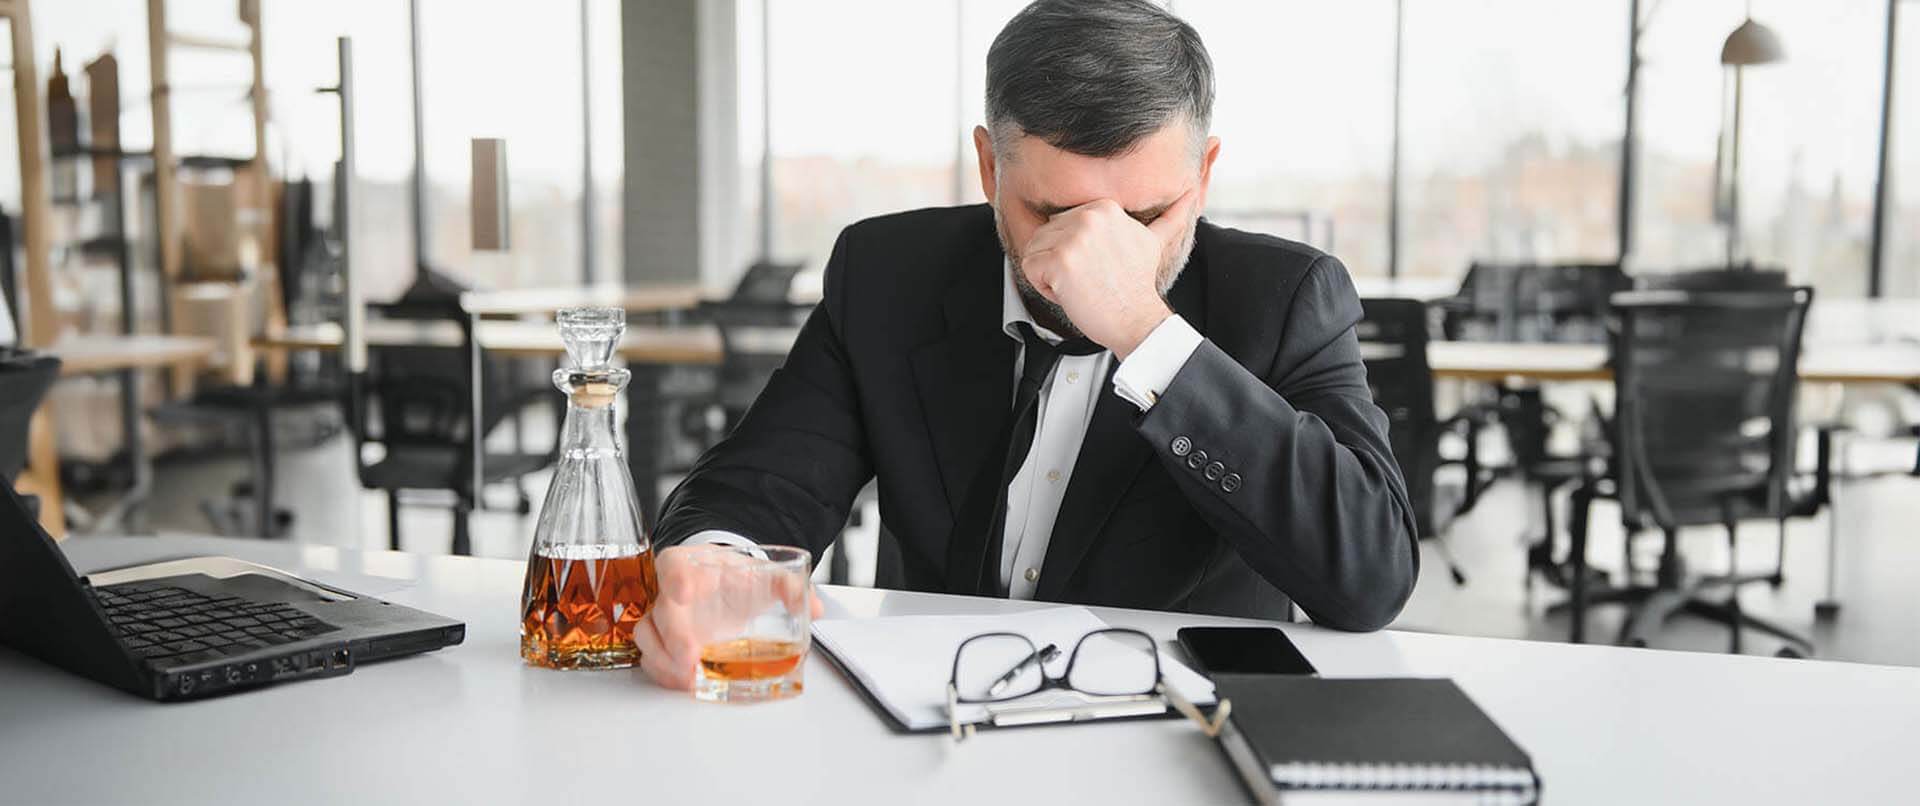 Stressed executive drinking at office. This could represent someone with an alcohol addiction. Get alcohol addiction treatment in New York City with an addiction treatment psychologist at Addiction Treatment Expert 10022